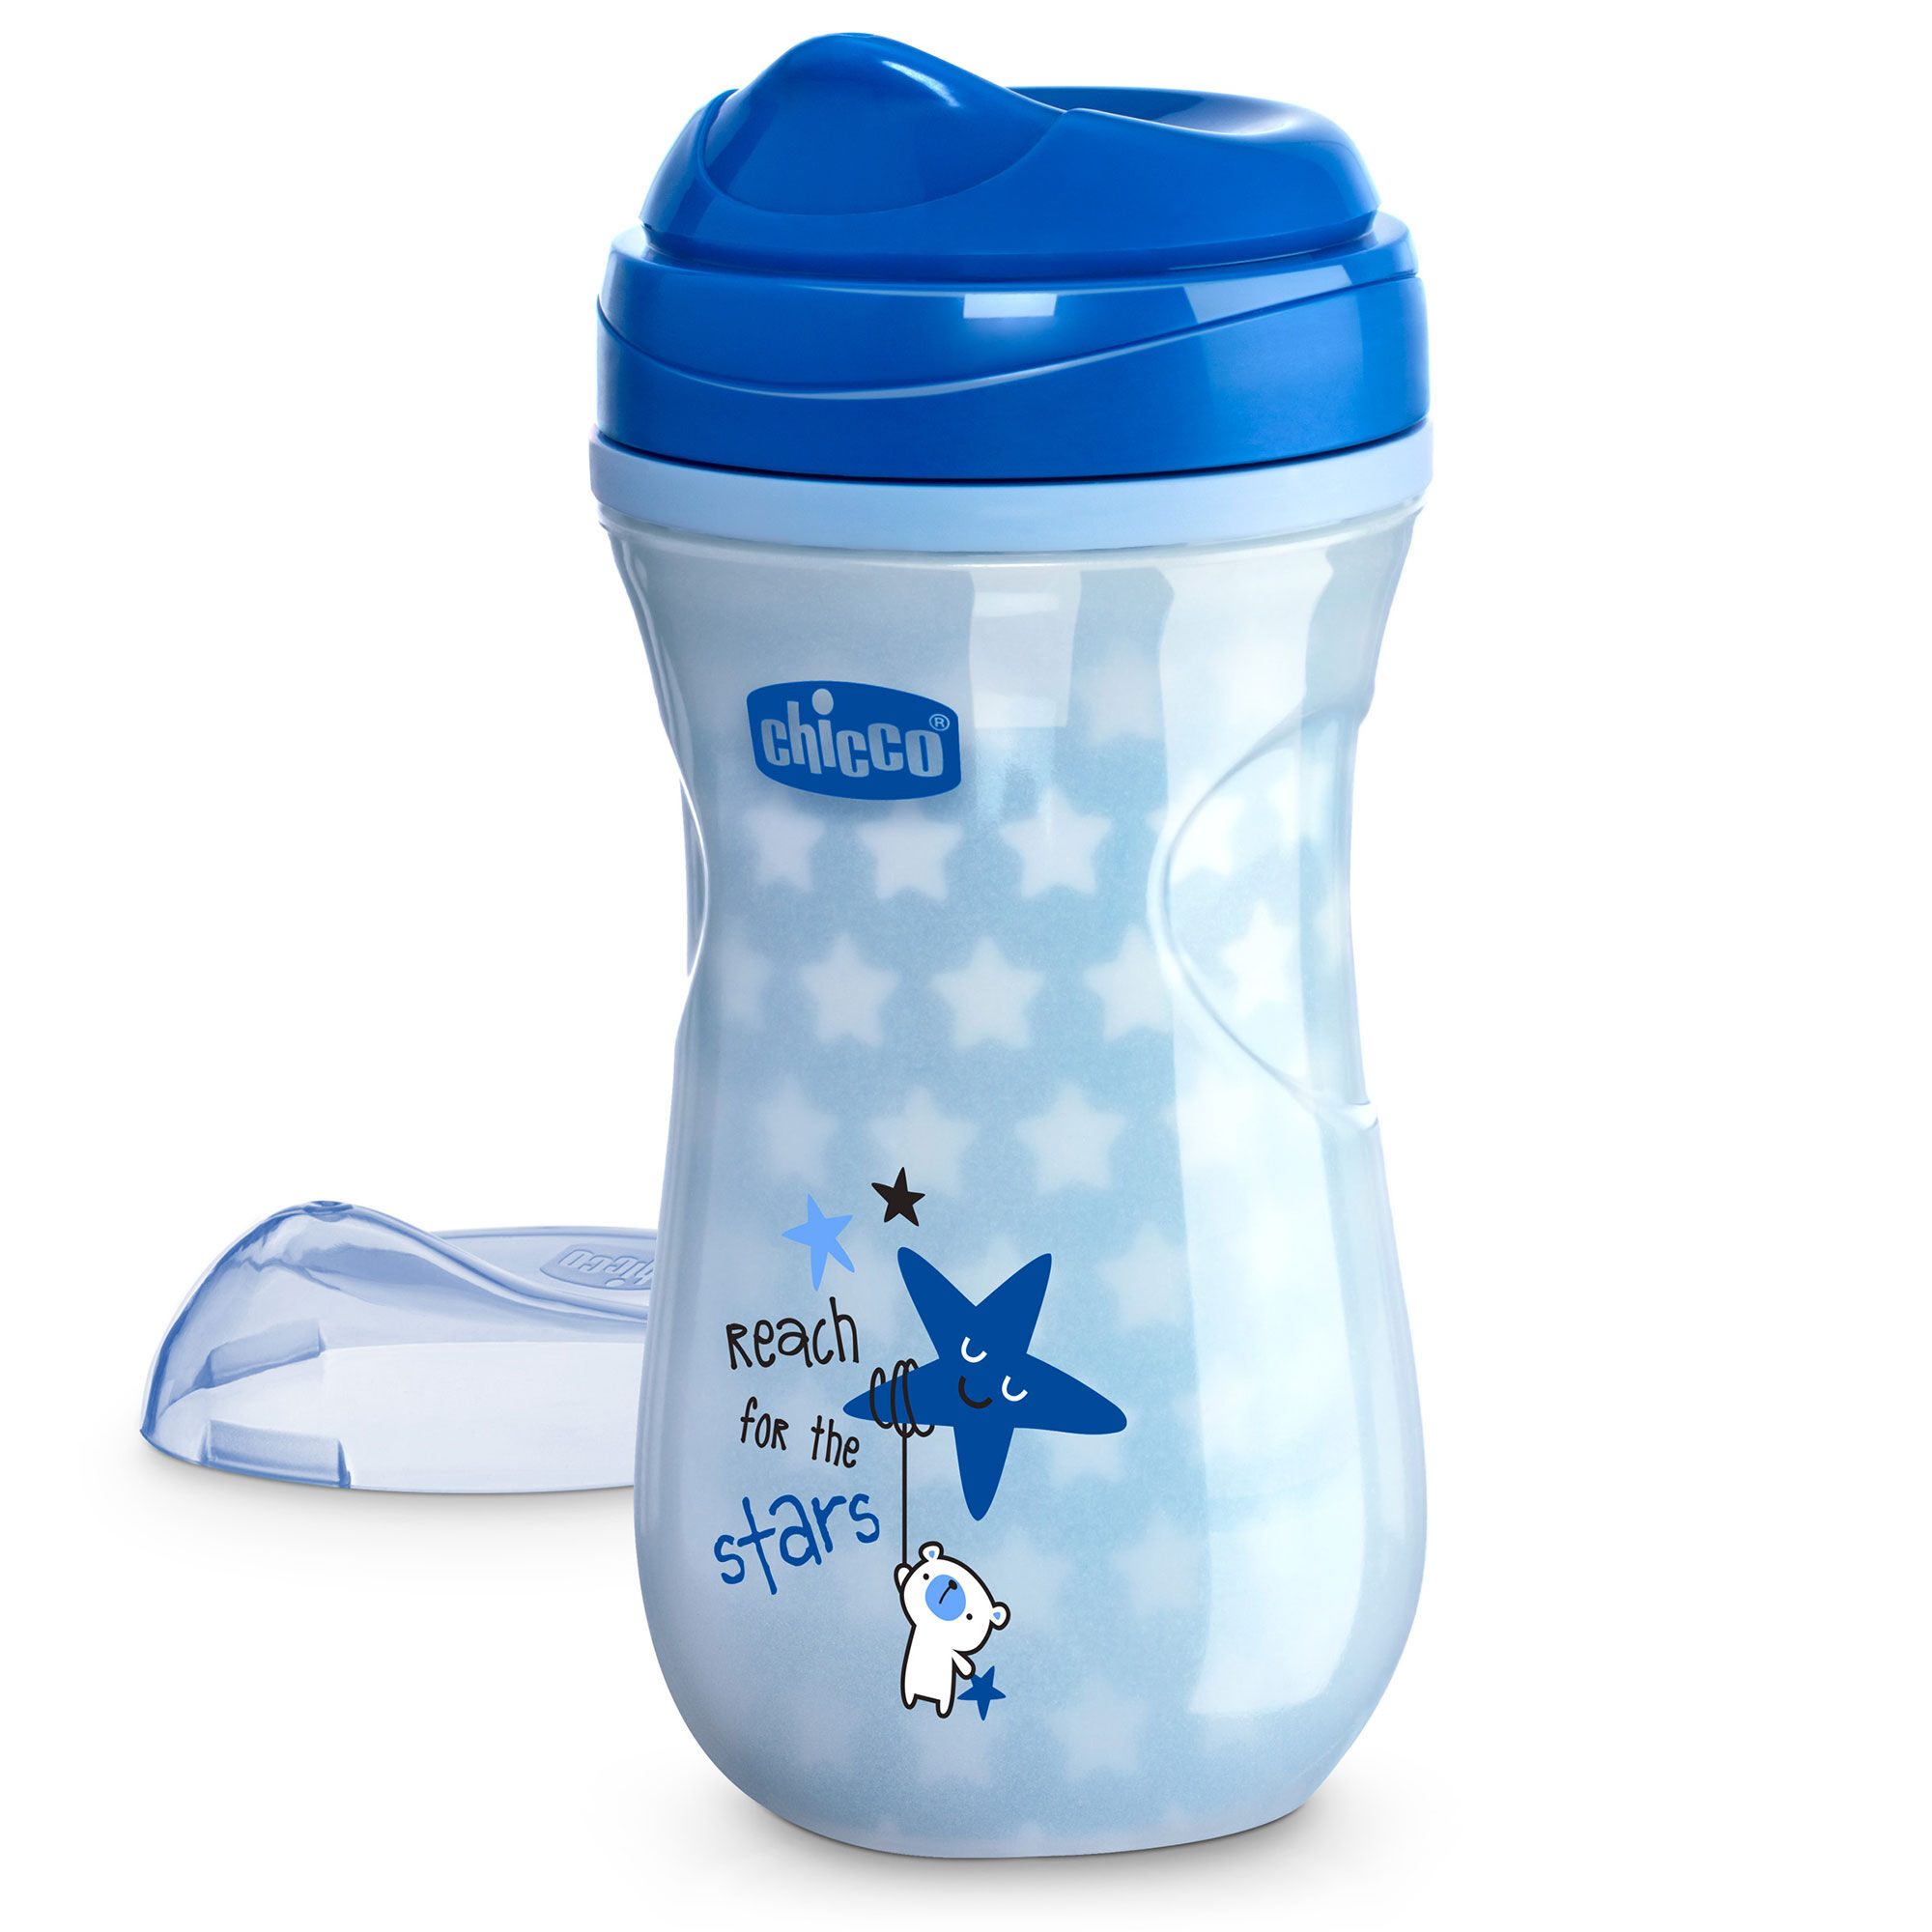 Trainer Sippee Cup Product Support